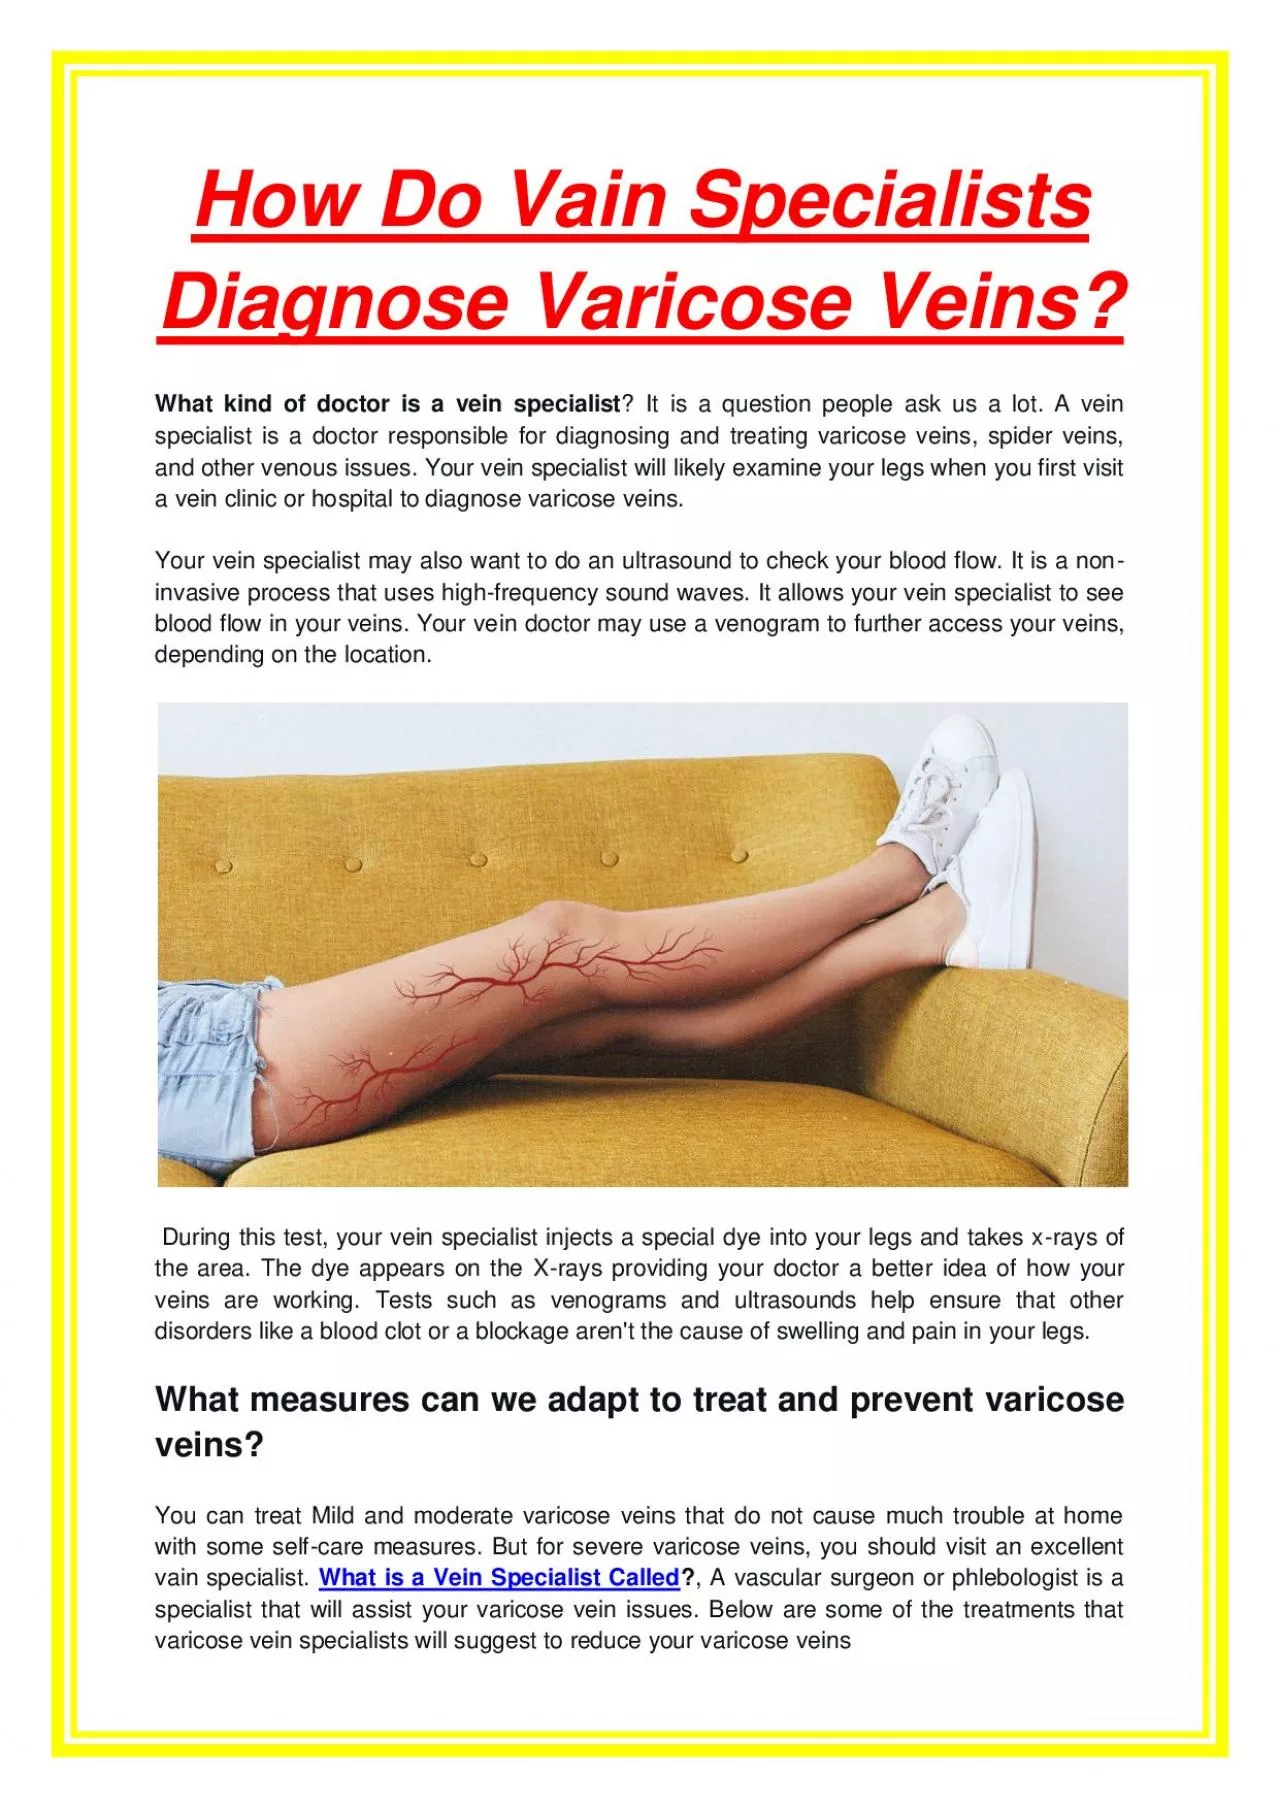 How Do Vain Specialists Diagnose Varicose Veins?